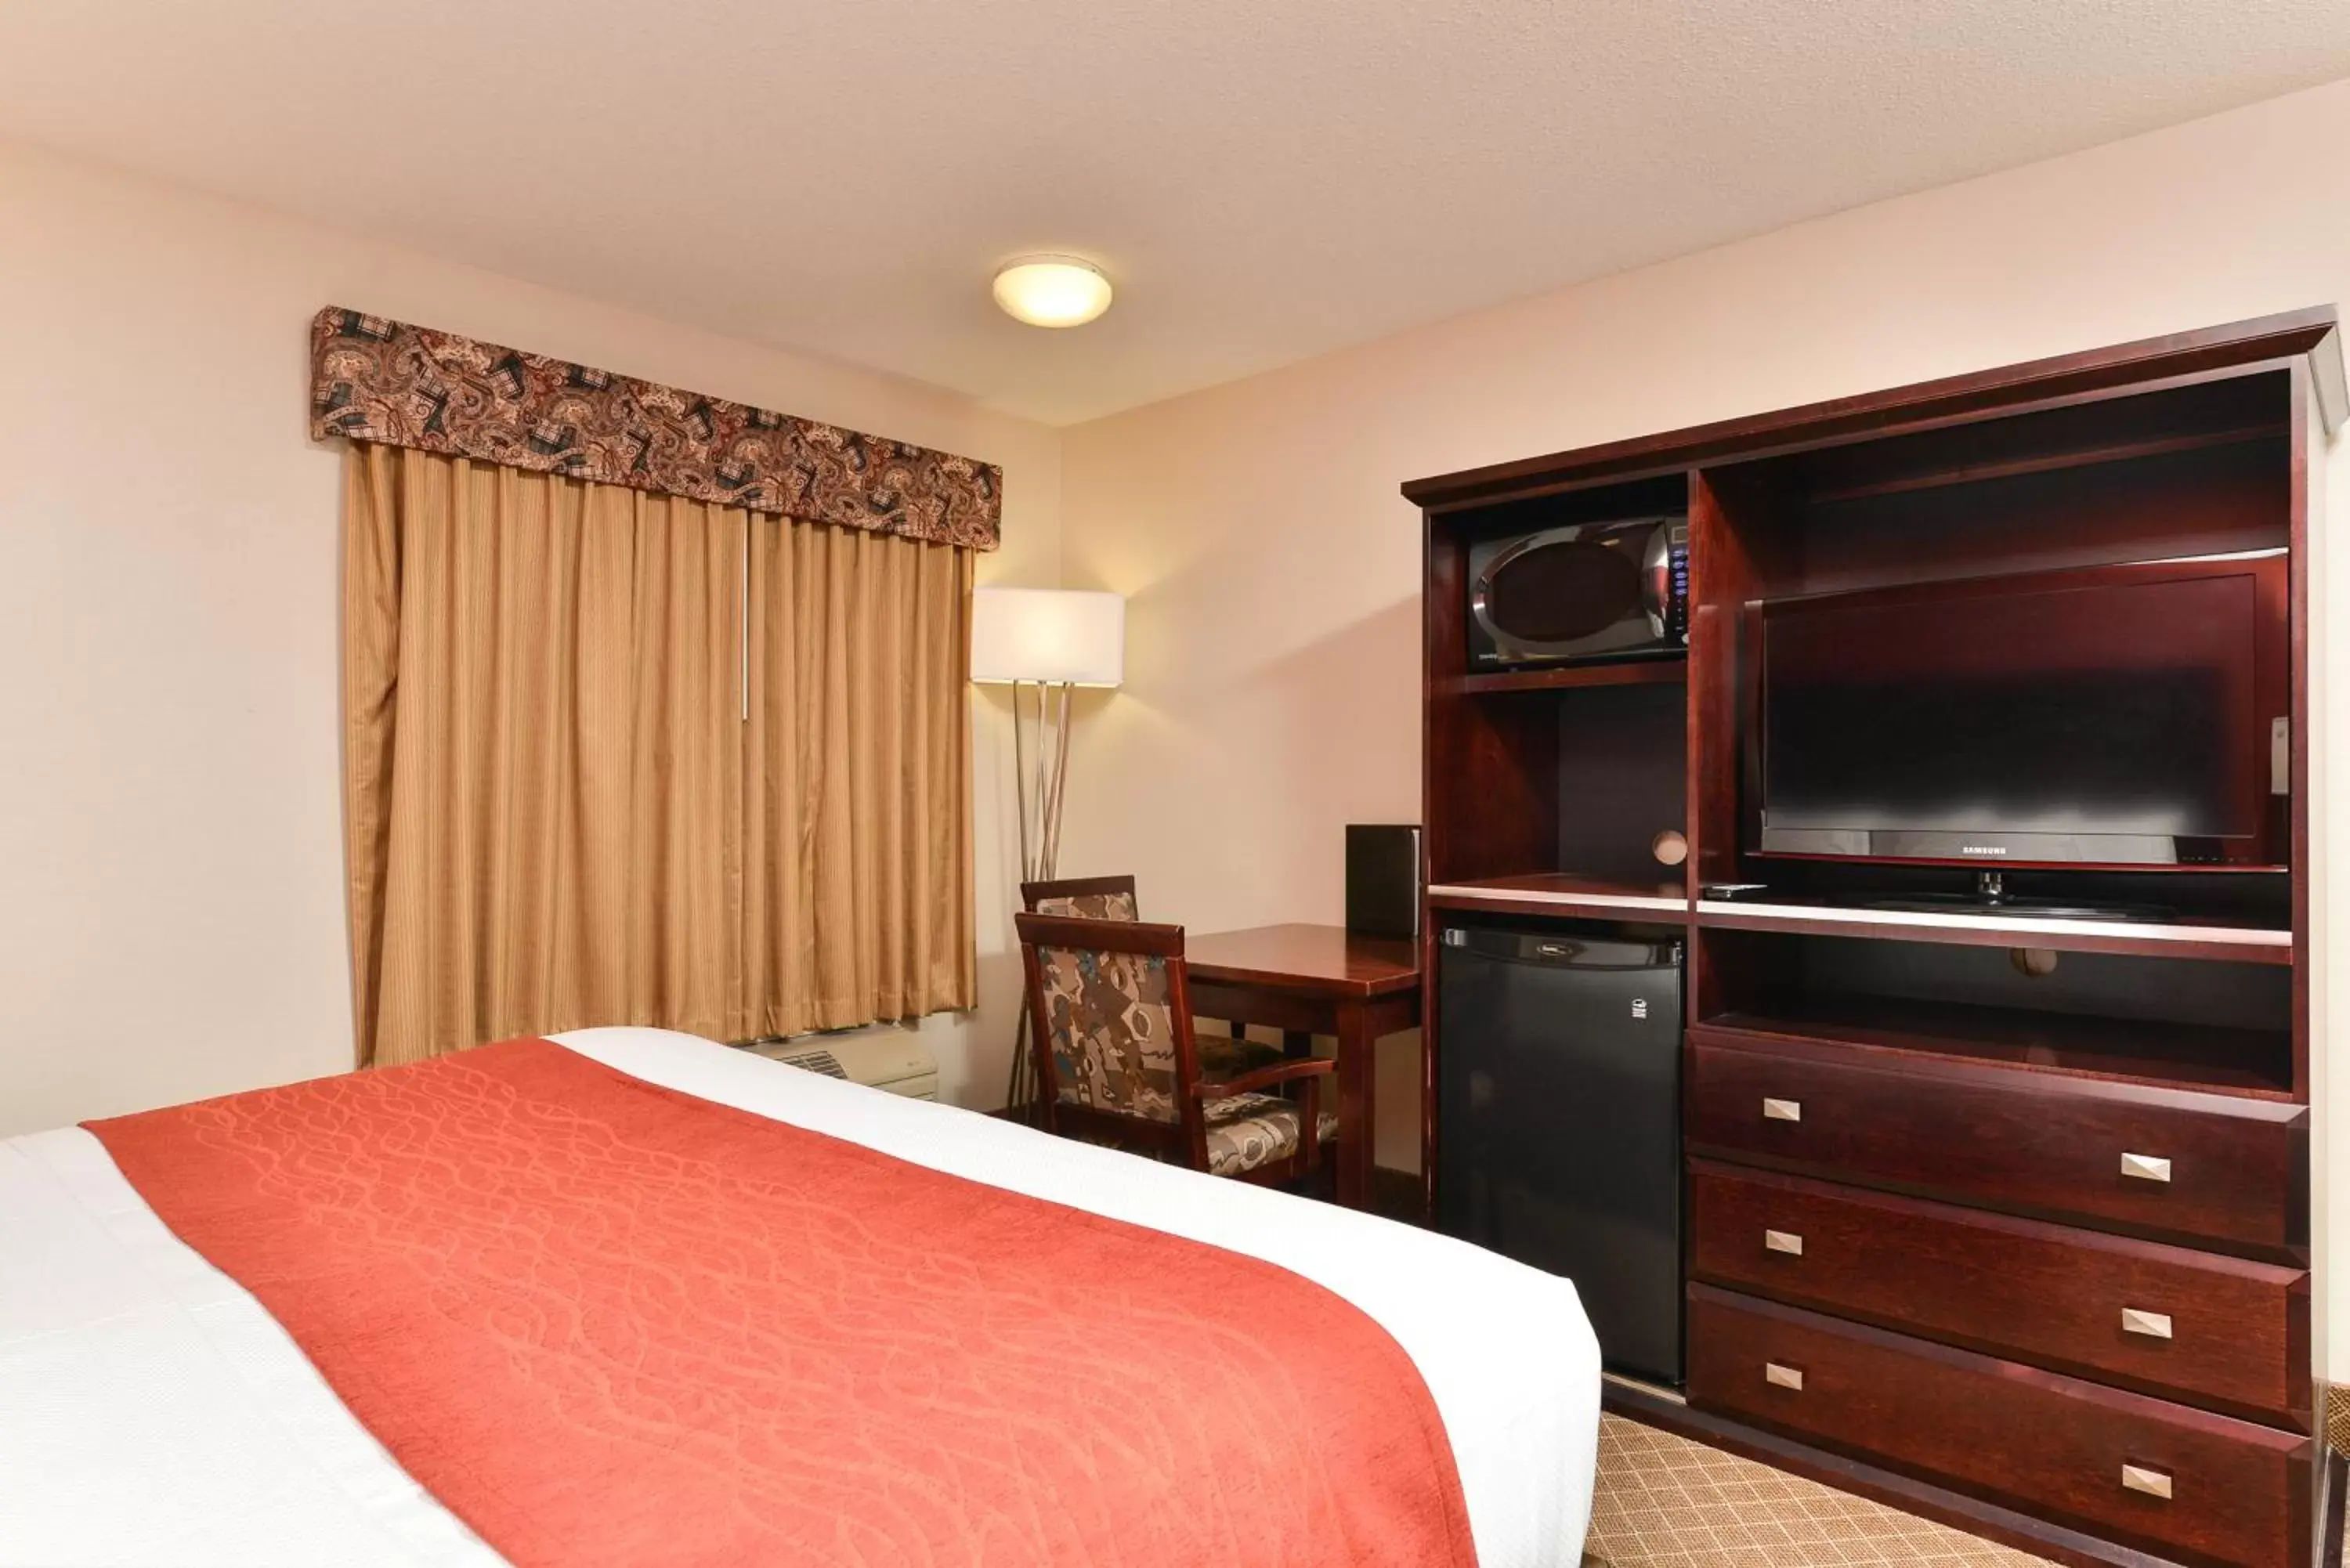 Queen Suite with Sofa Bed - Non-Smoking in Comfort Inn & Suites Airport South